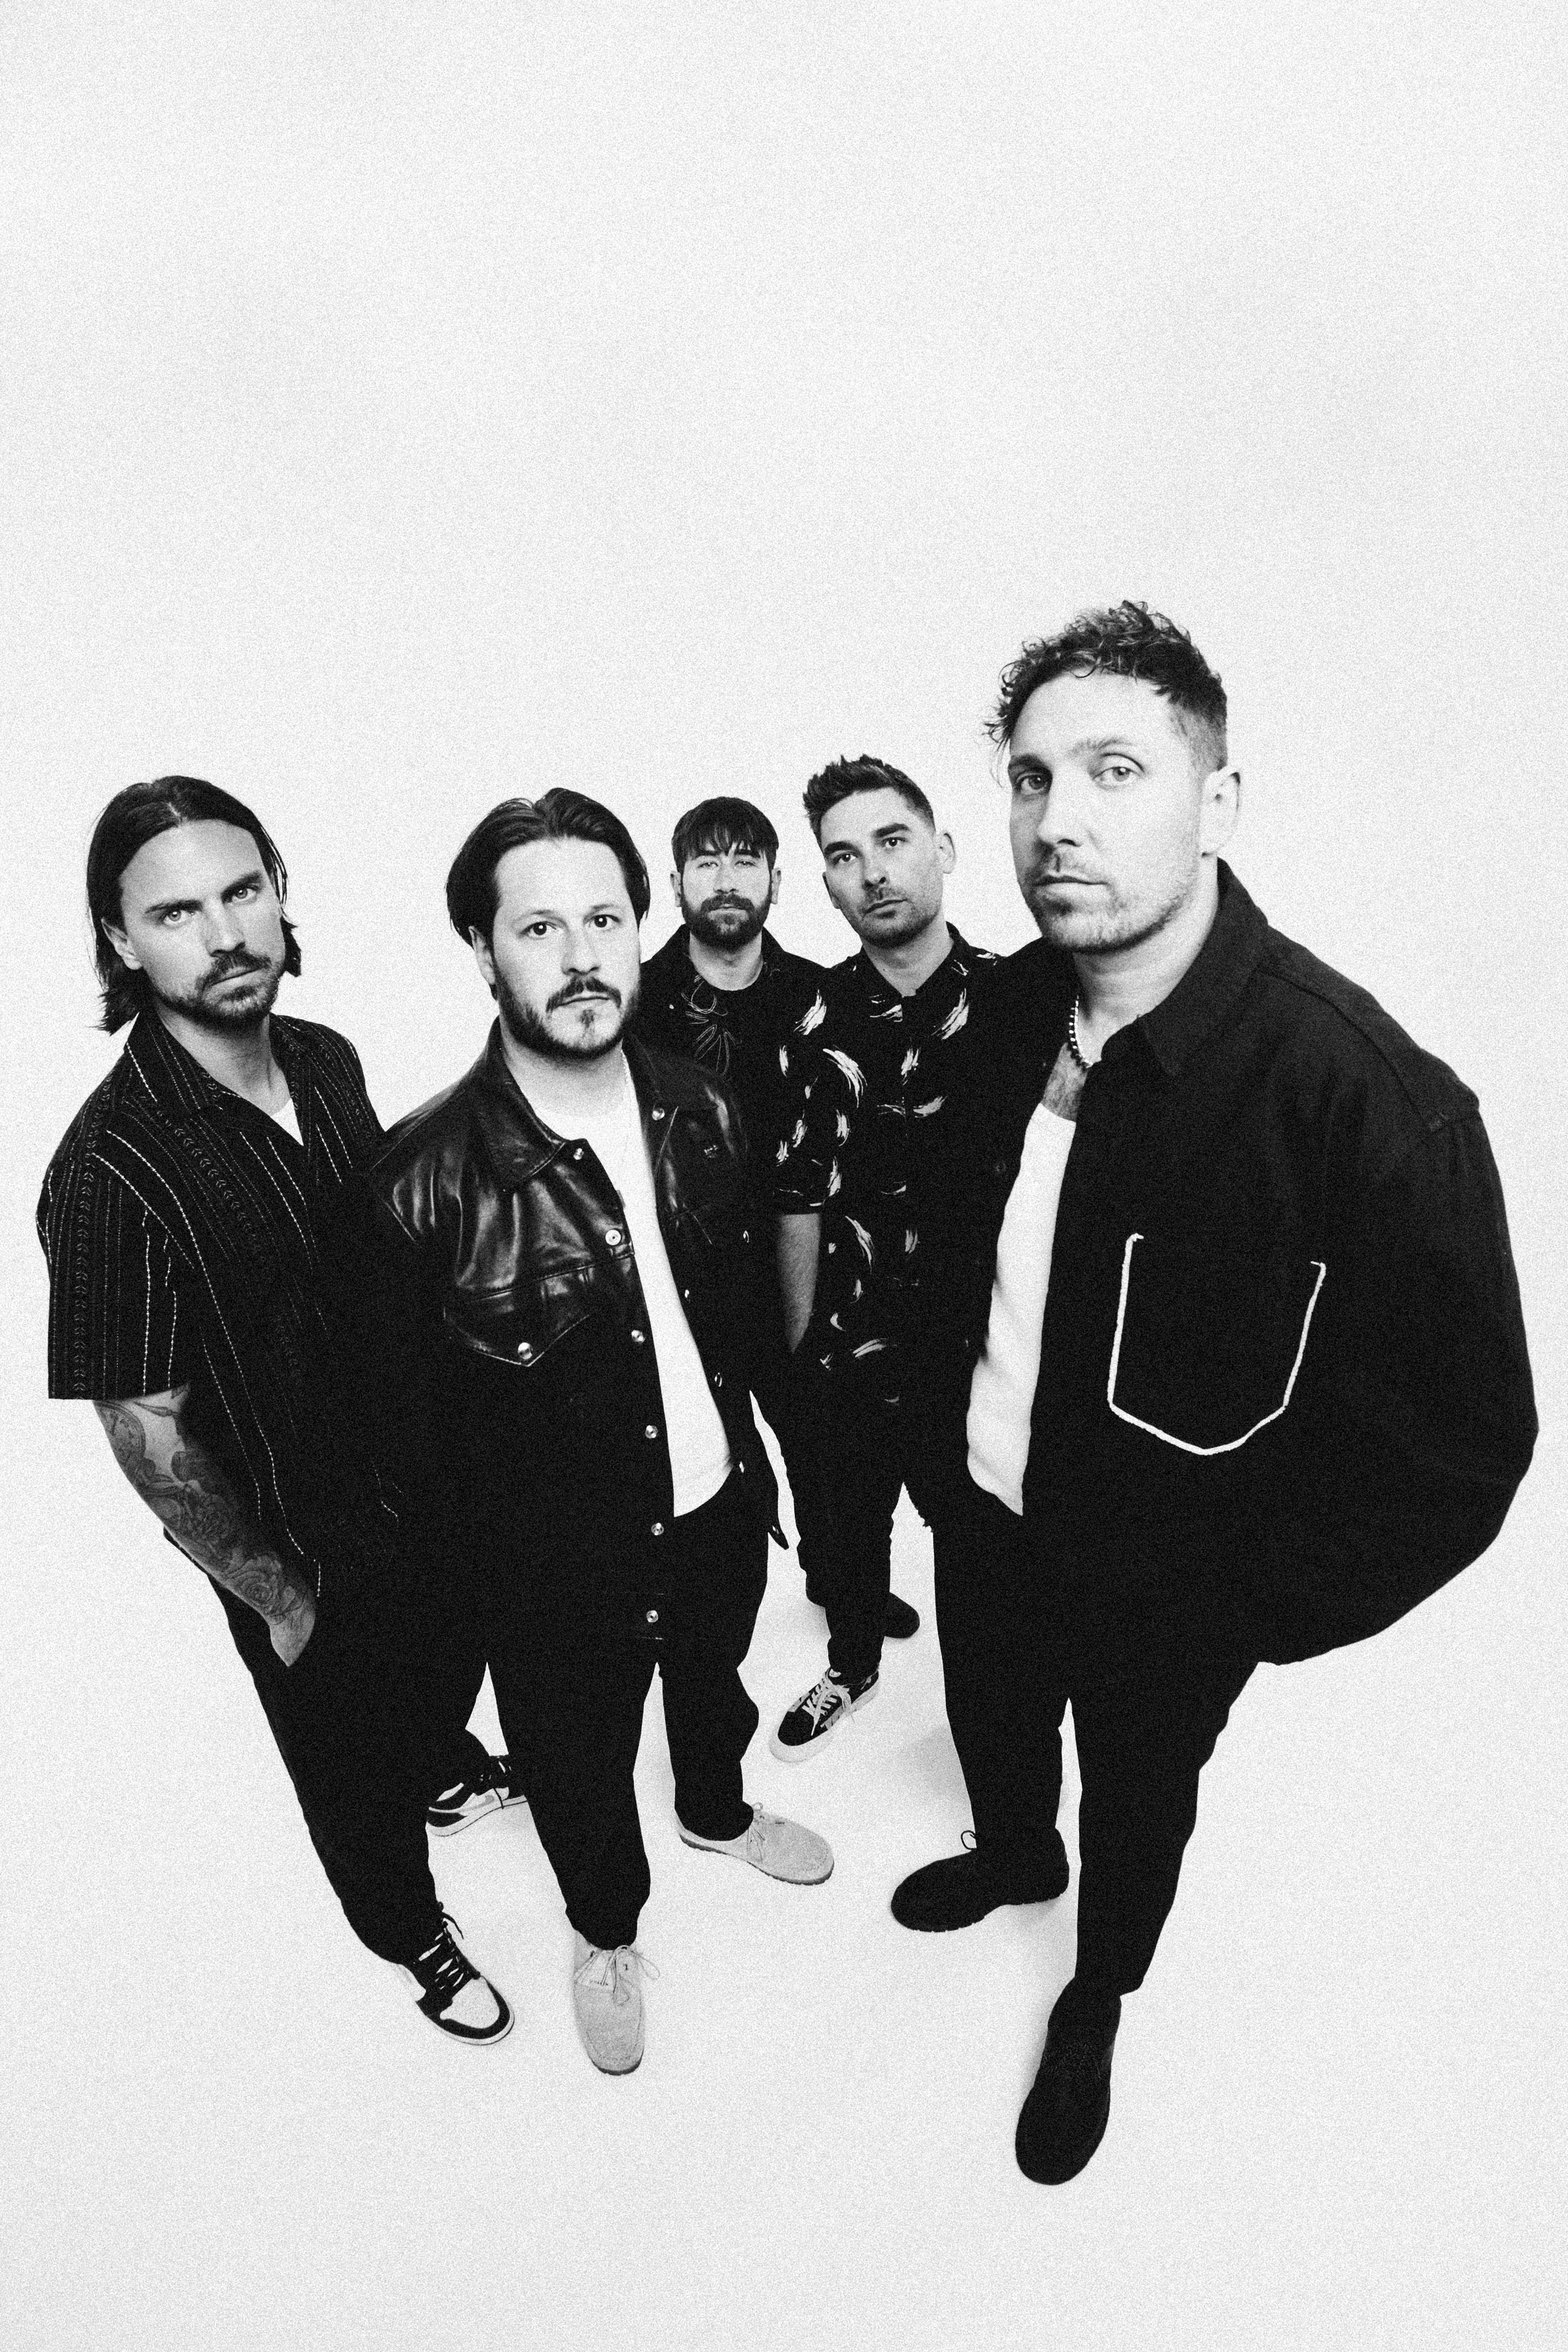 You Me At Six - the Final Nights of Six presale code for event tickets in London,  (OVO Arena, Wembley)